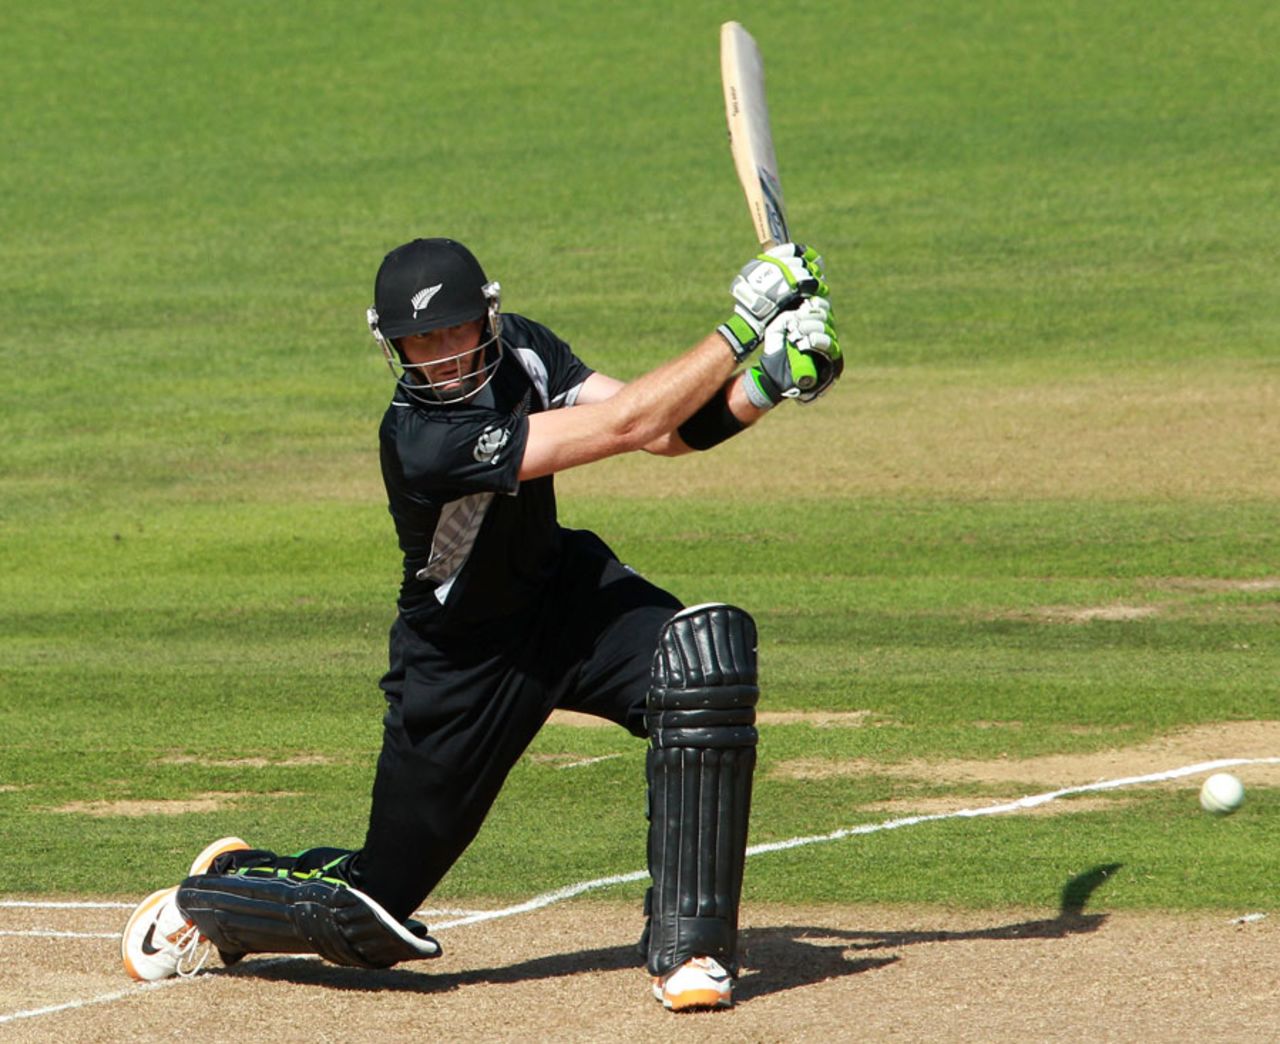 Martin Guptill gets on one knee to drive, New Zealand v South Africa, 2nd ODI, Napier, February 29, 2012 